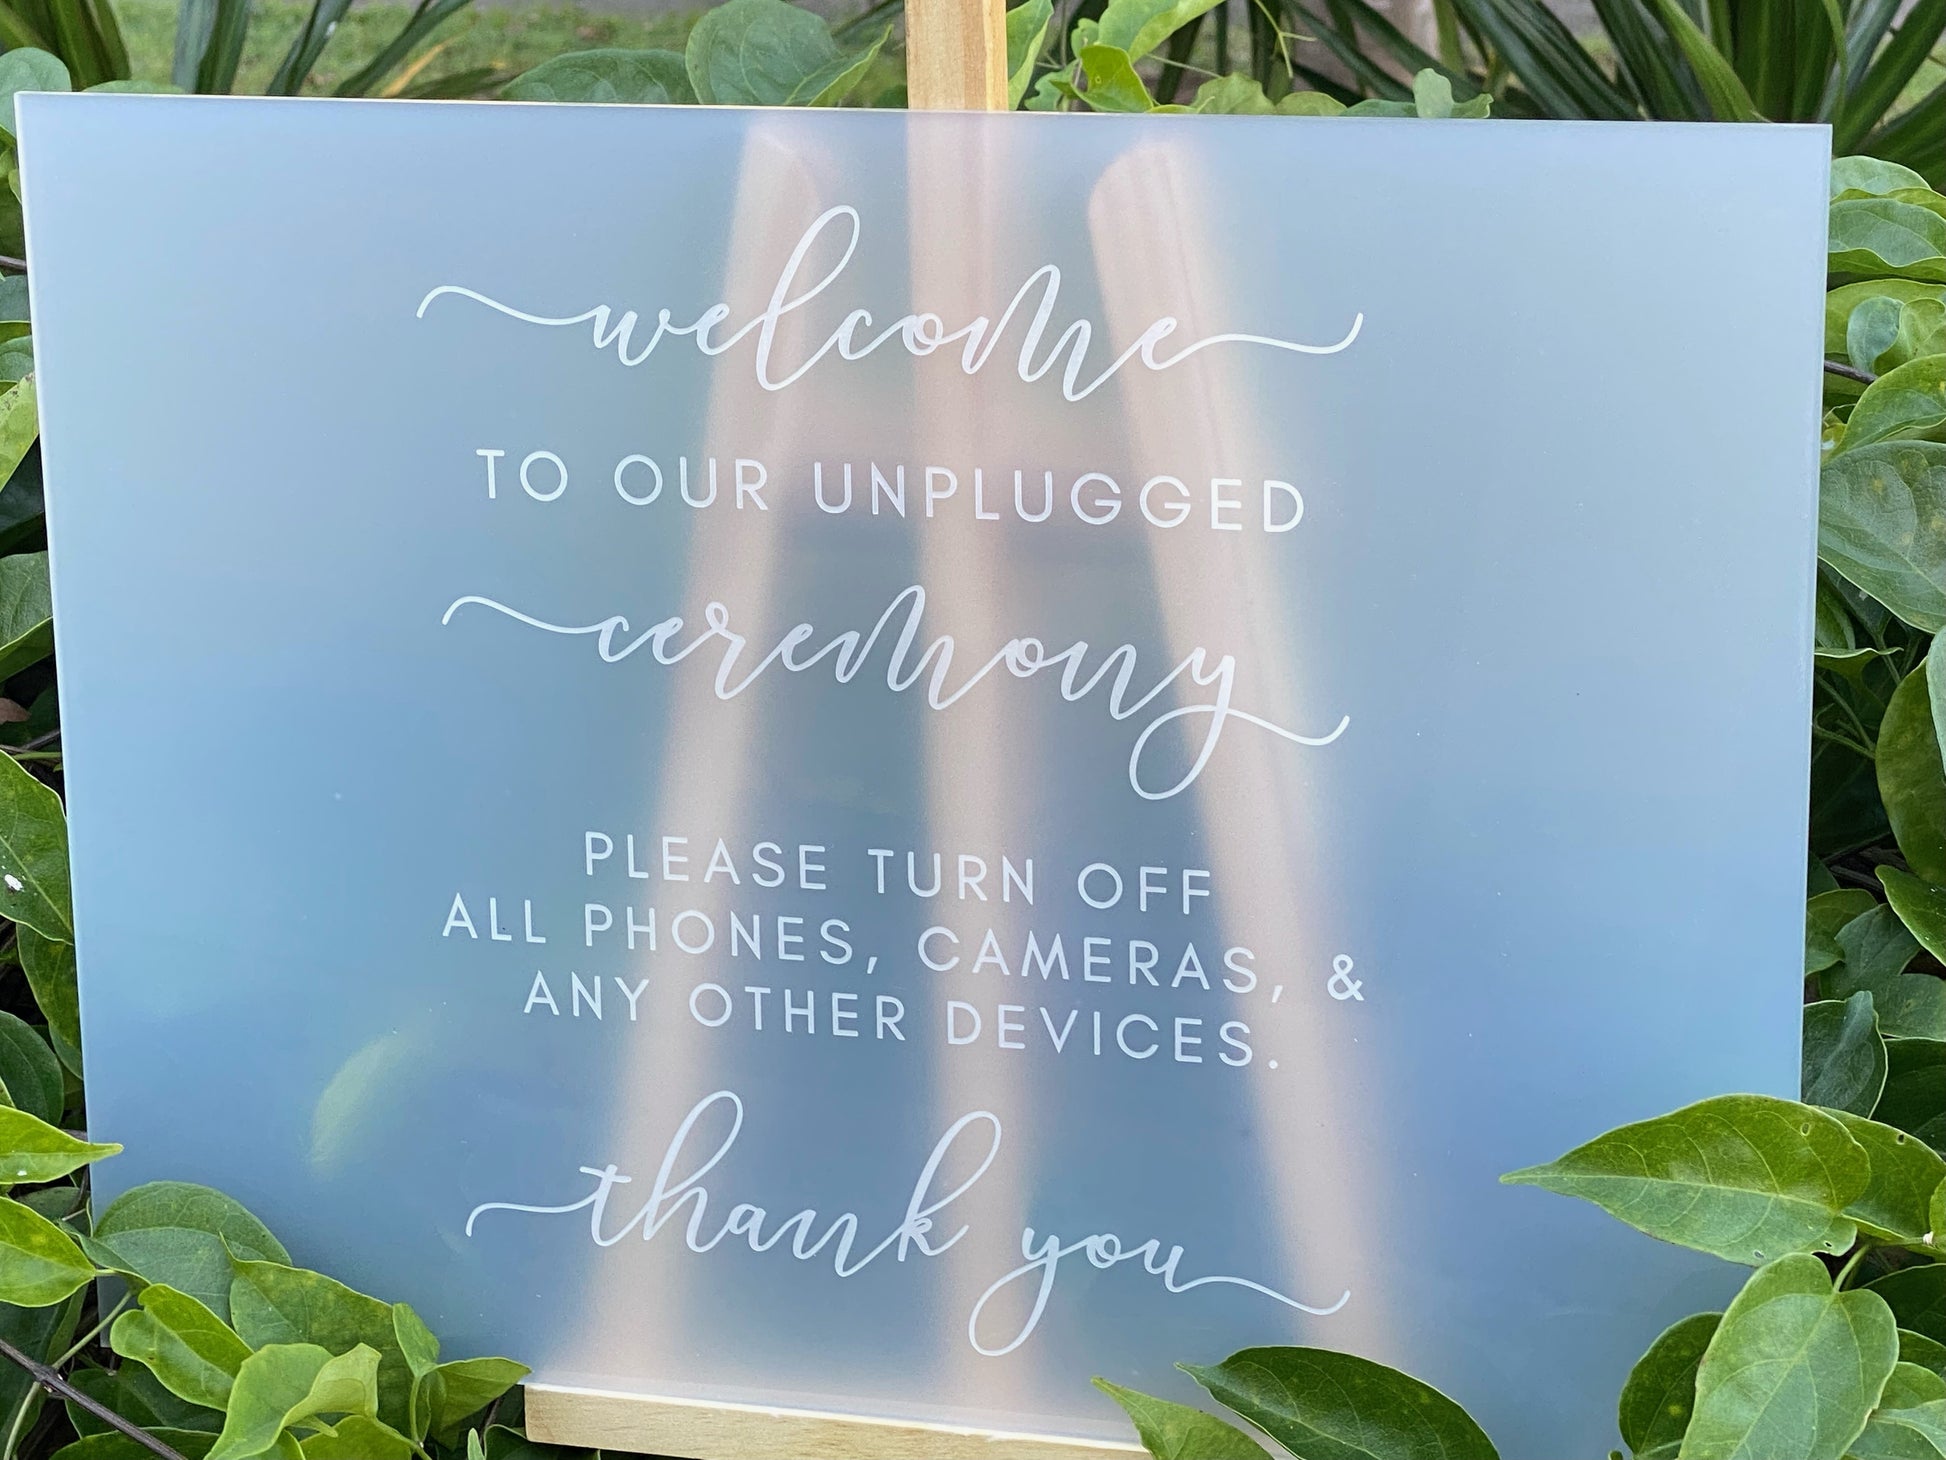 Frosted acrylic sign with laser engraved design, perfect to display for your unplugged wedding ceremony 